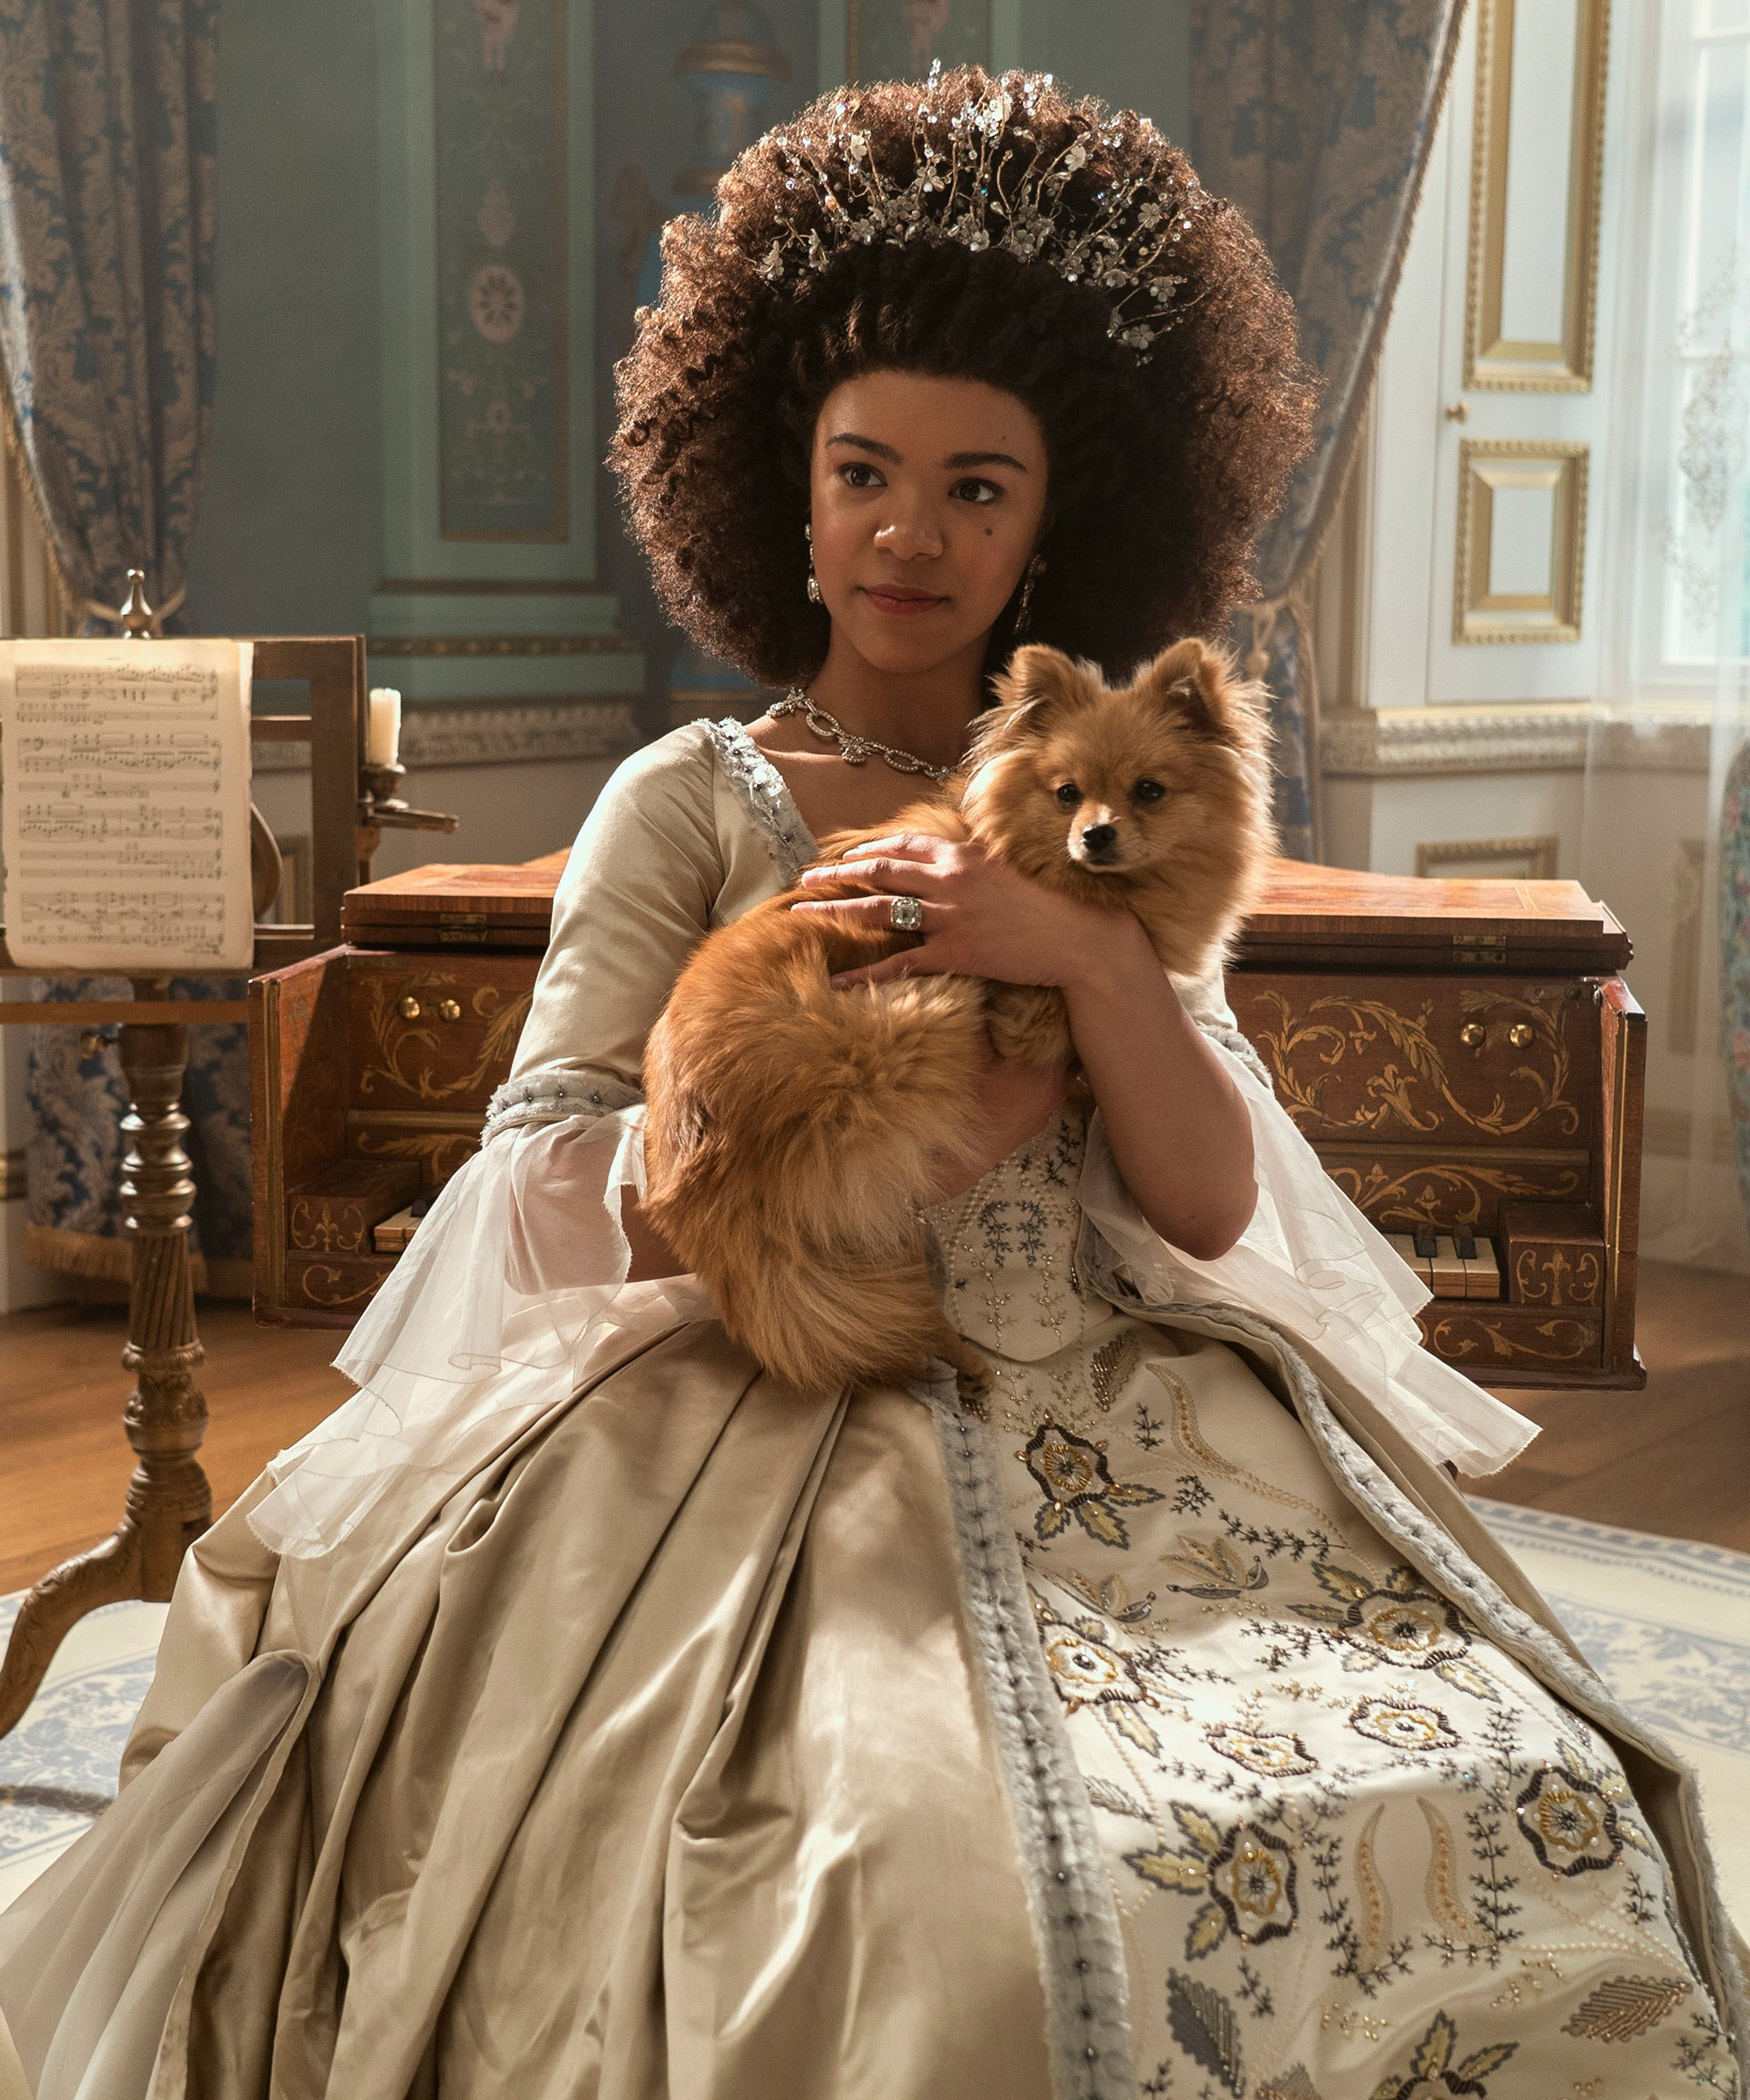 On Queen Charlotte A Bridgerton Story, Race and Romance image